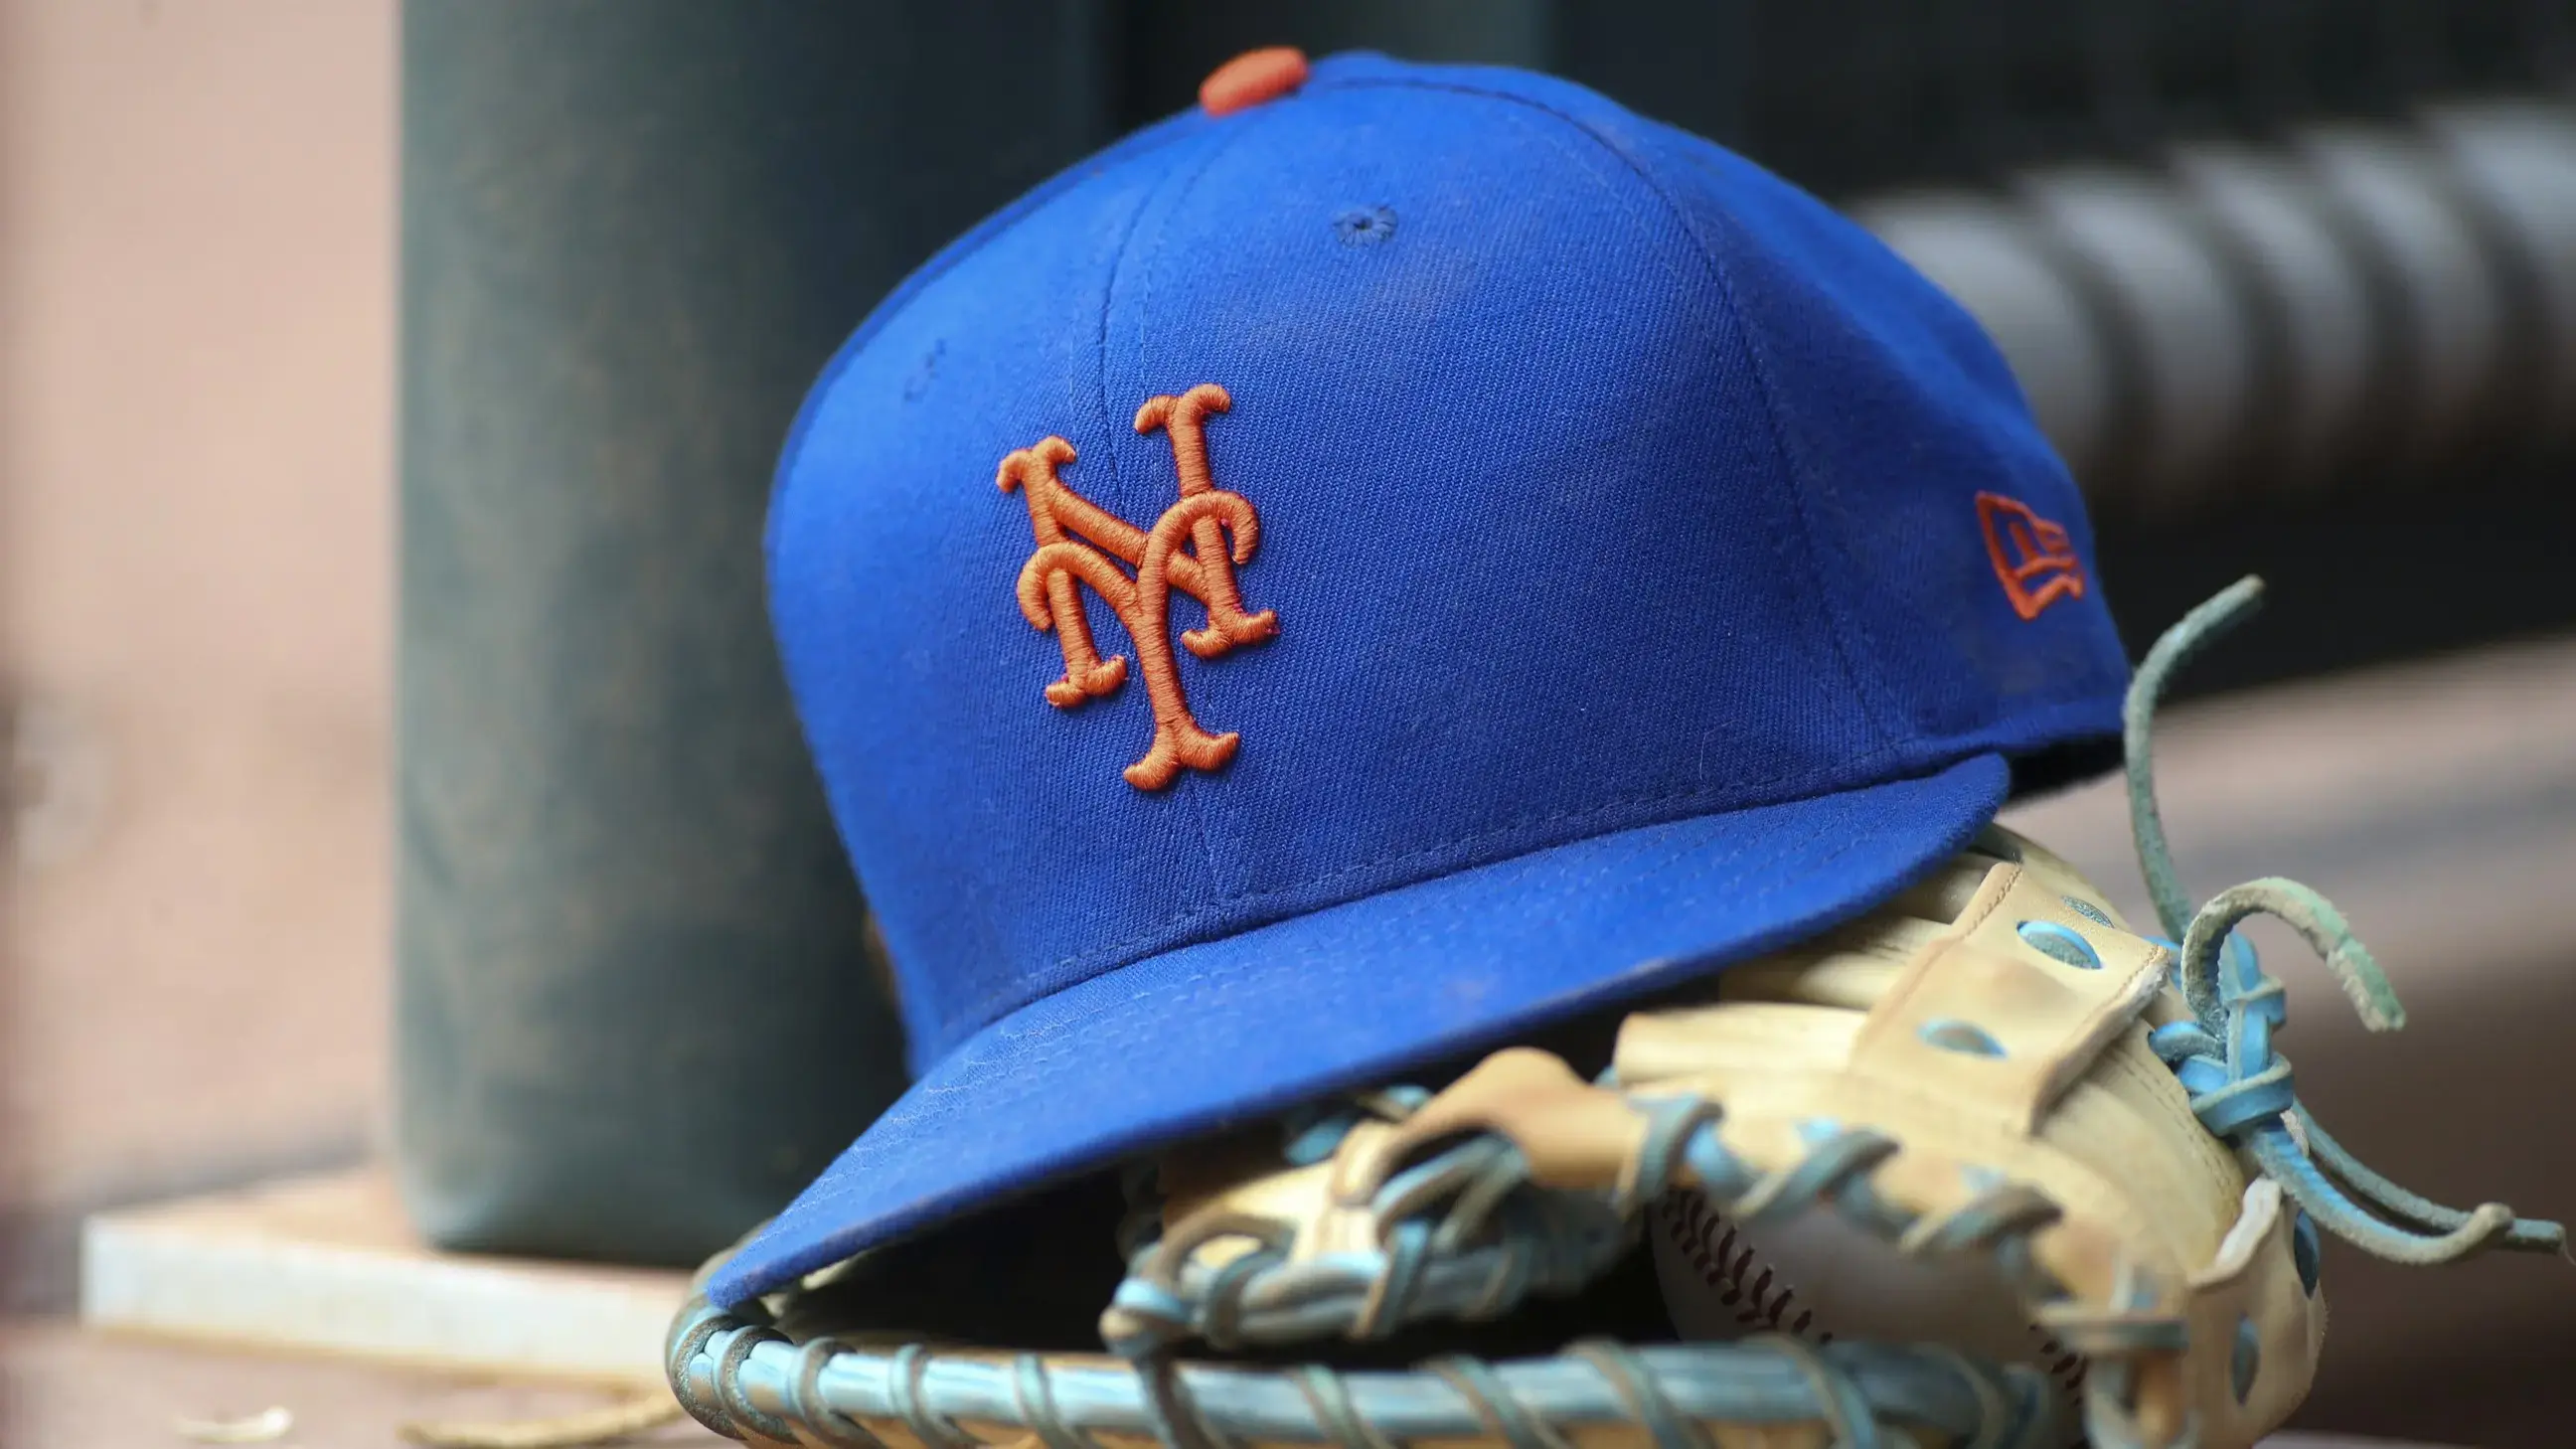 Jul 13, 2022; Atlanta, Georgia, USA; A detailed view of a New York Mets hat and glove in the dugout against the Atlanta Braves in the eighth inning at Truist Park. / Brett Davis-USA TODAY Sports